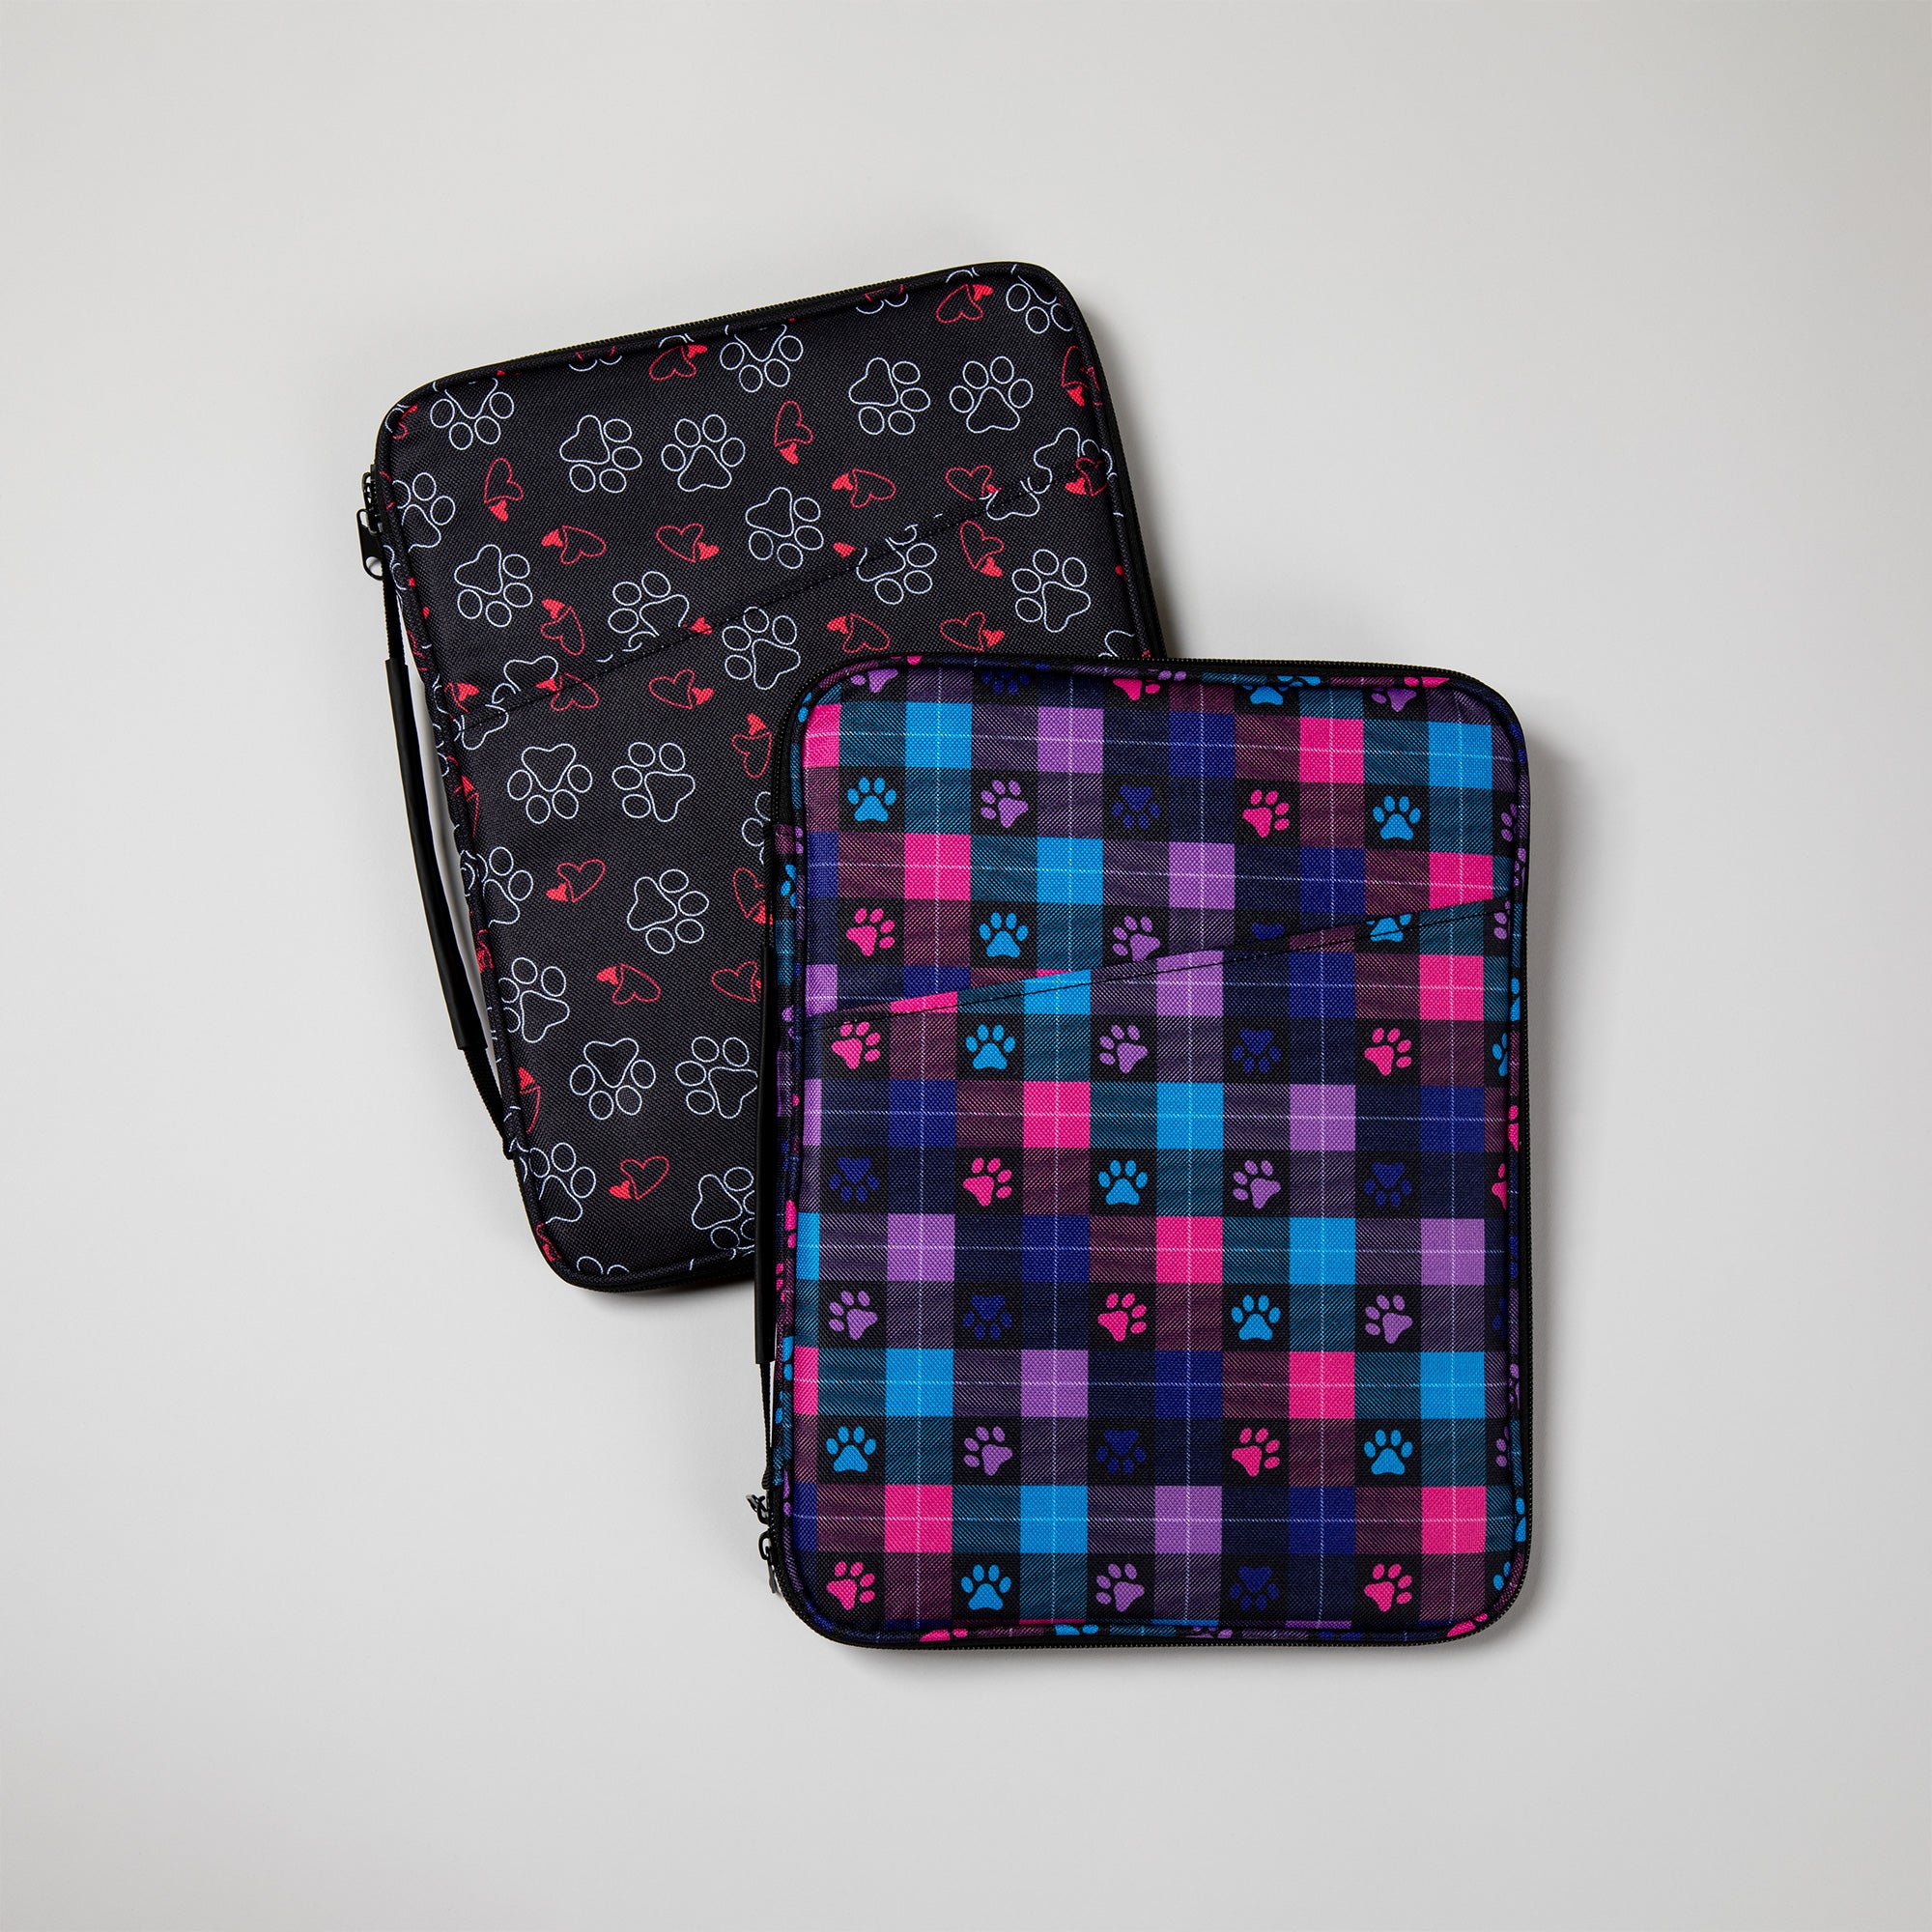 Pawfectly Patterned Tablet Case - Jewel Tone Paws & Plaid